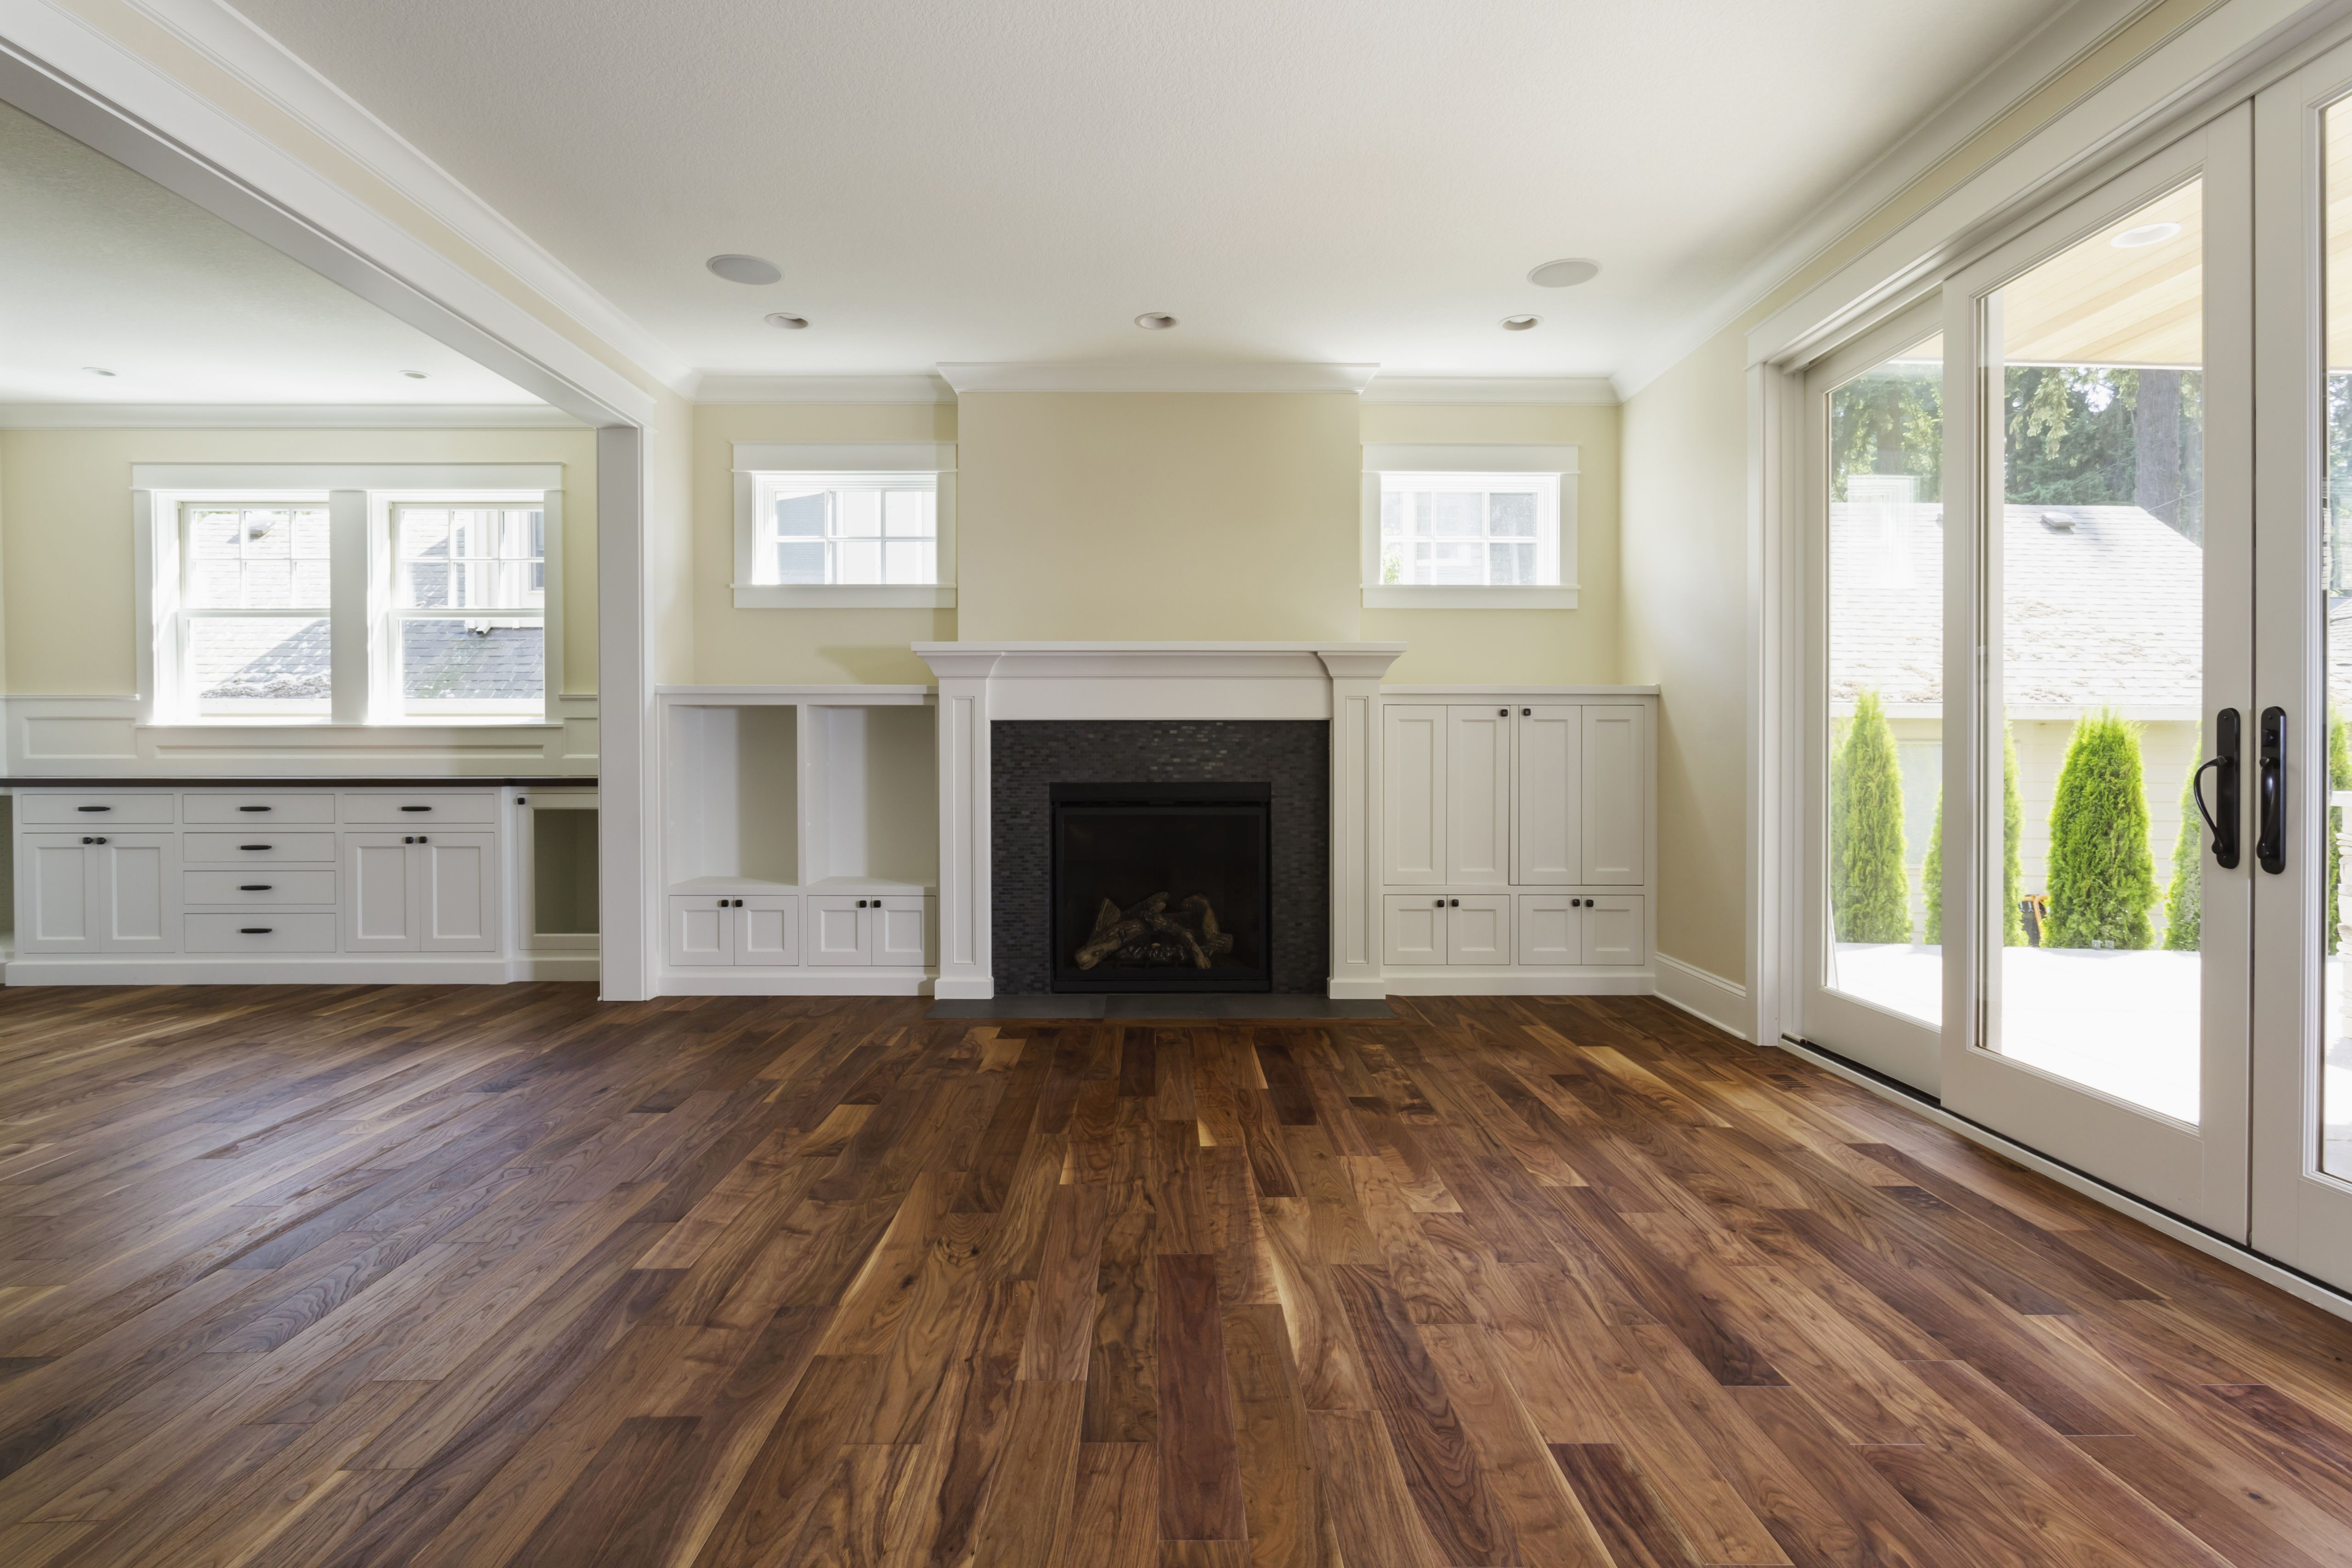 cheap hardwood flooring atlanta of the pros and cons of prefinished hardwood flooring pertaining to fireplace and built in shelves in living room 57bef8e33df78cc16e